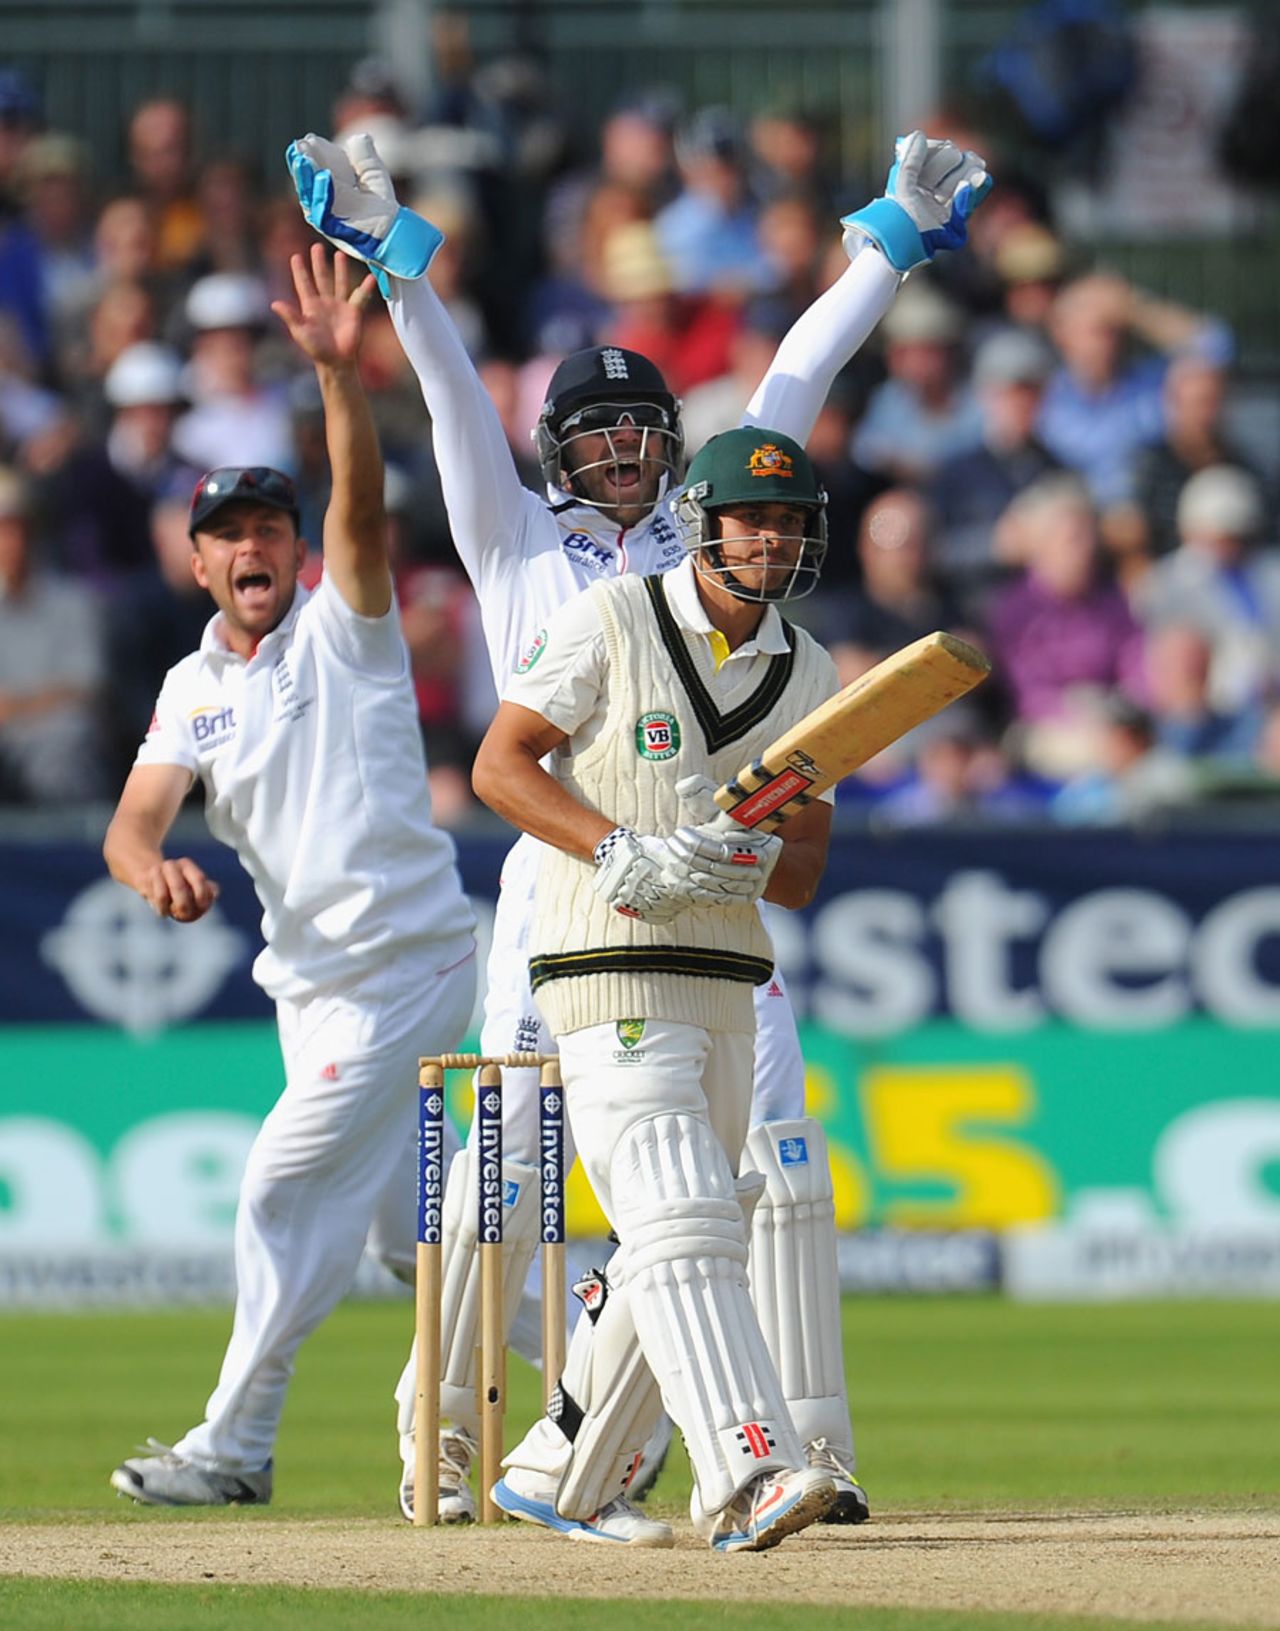 Usman Khawaja was lbw to Graeme Swann, England v Australia, 4th Investec Test, 4th day, Chester-le-Street, August 12, 2013